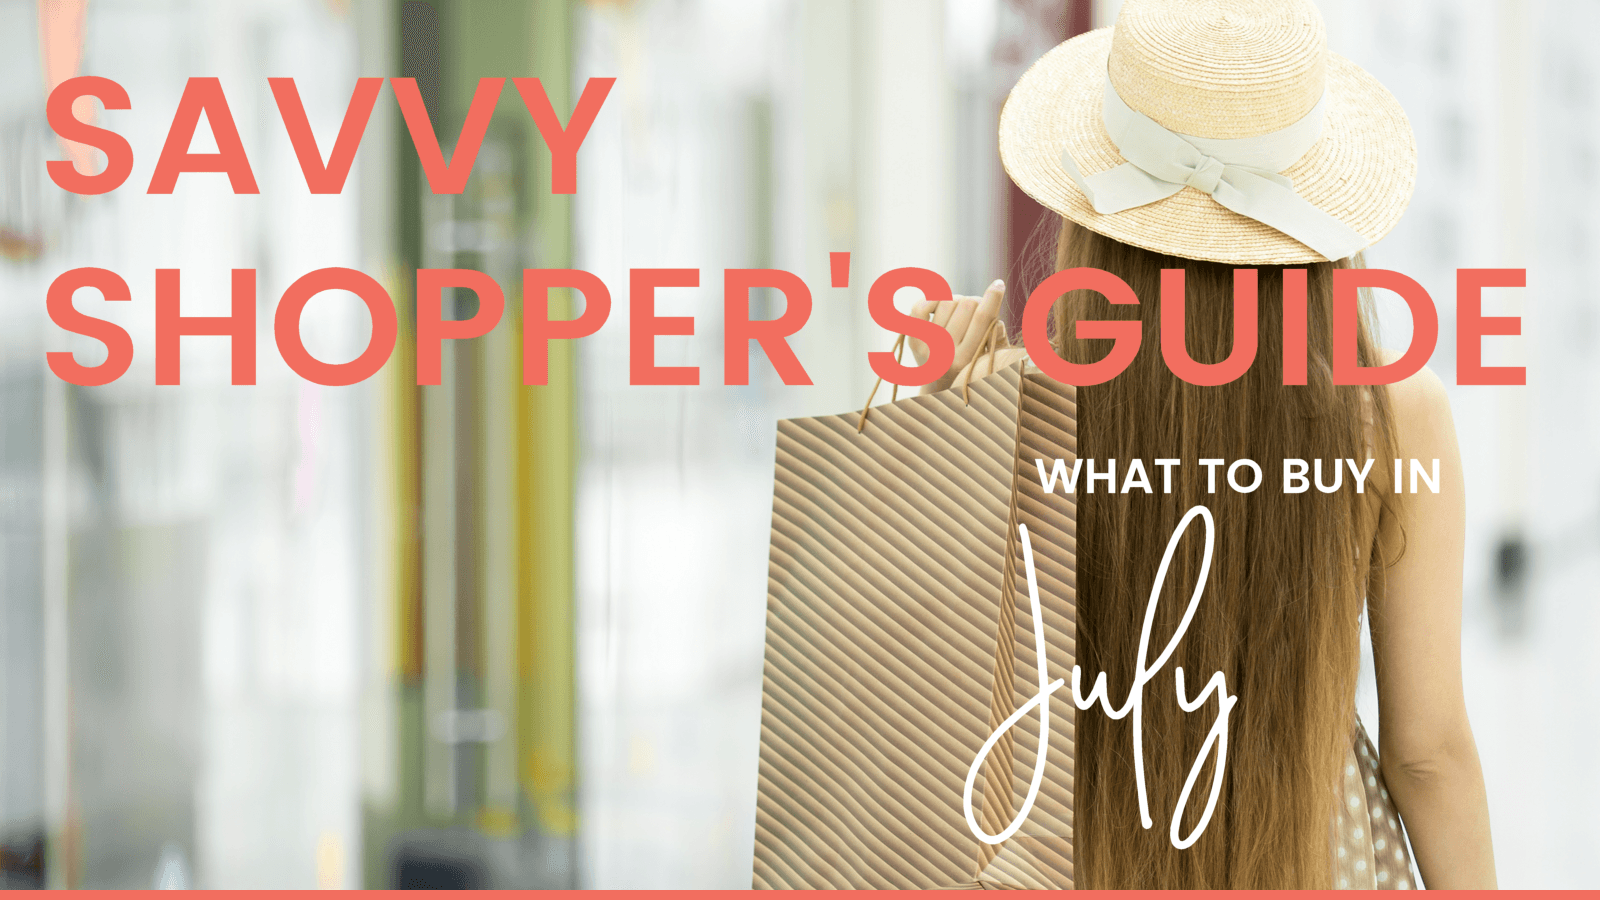 Savvy Shopper's Guide - What to Buy in July